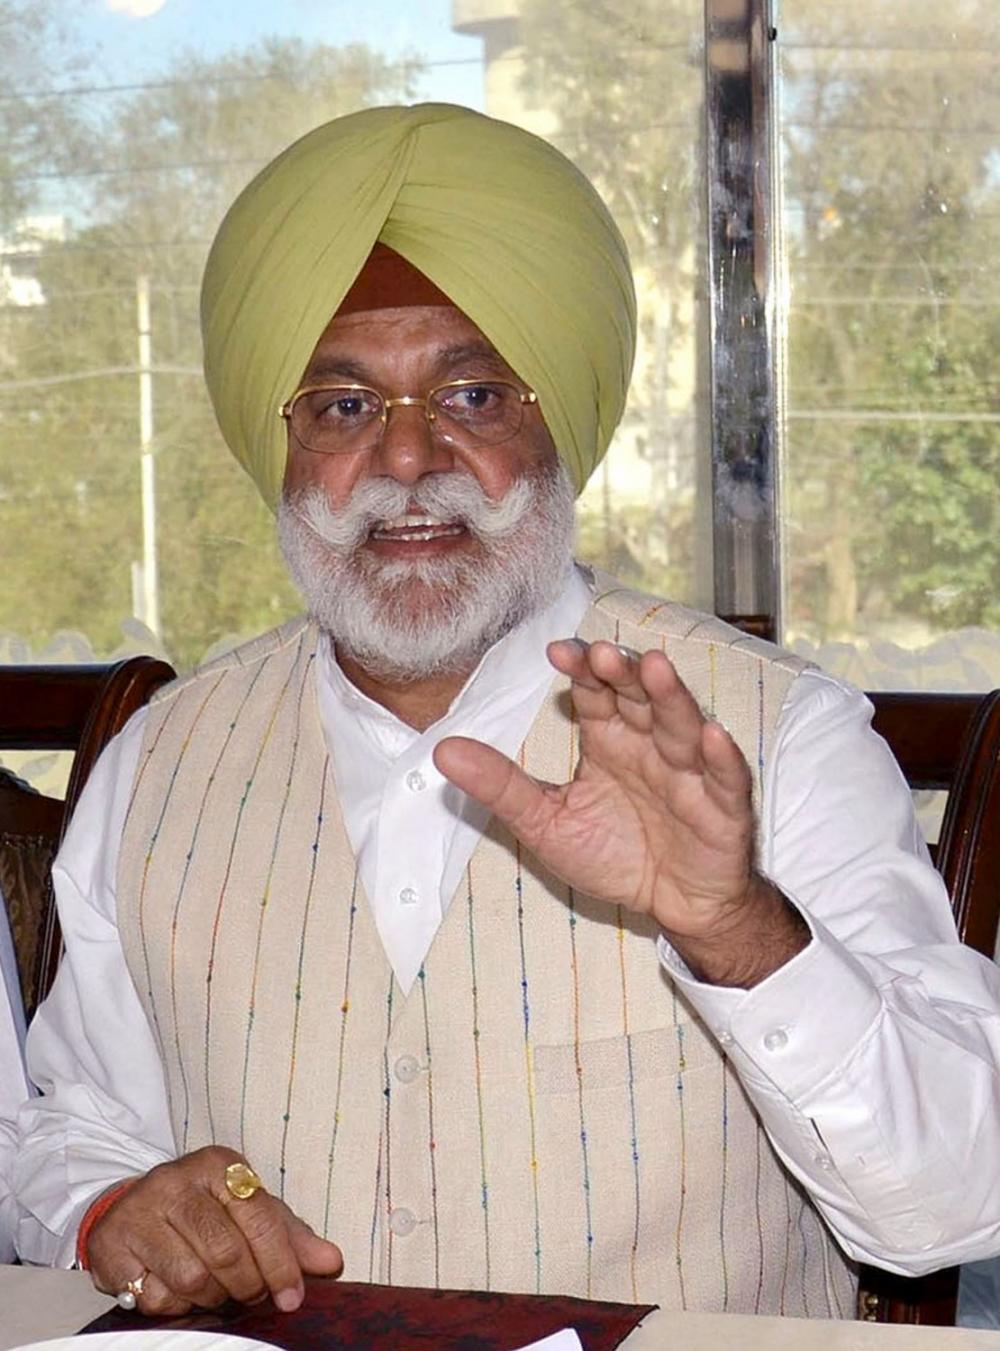 The Weekend Leader - Cong ex-leader Sodhi given 'Z' category security after joining BJP